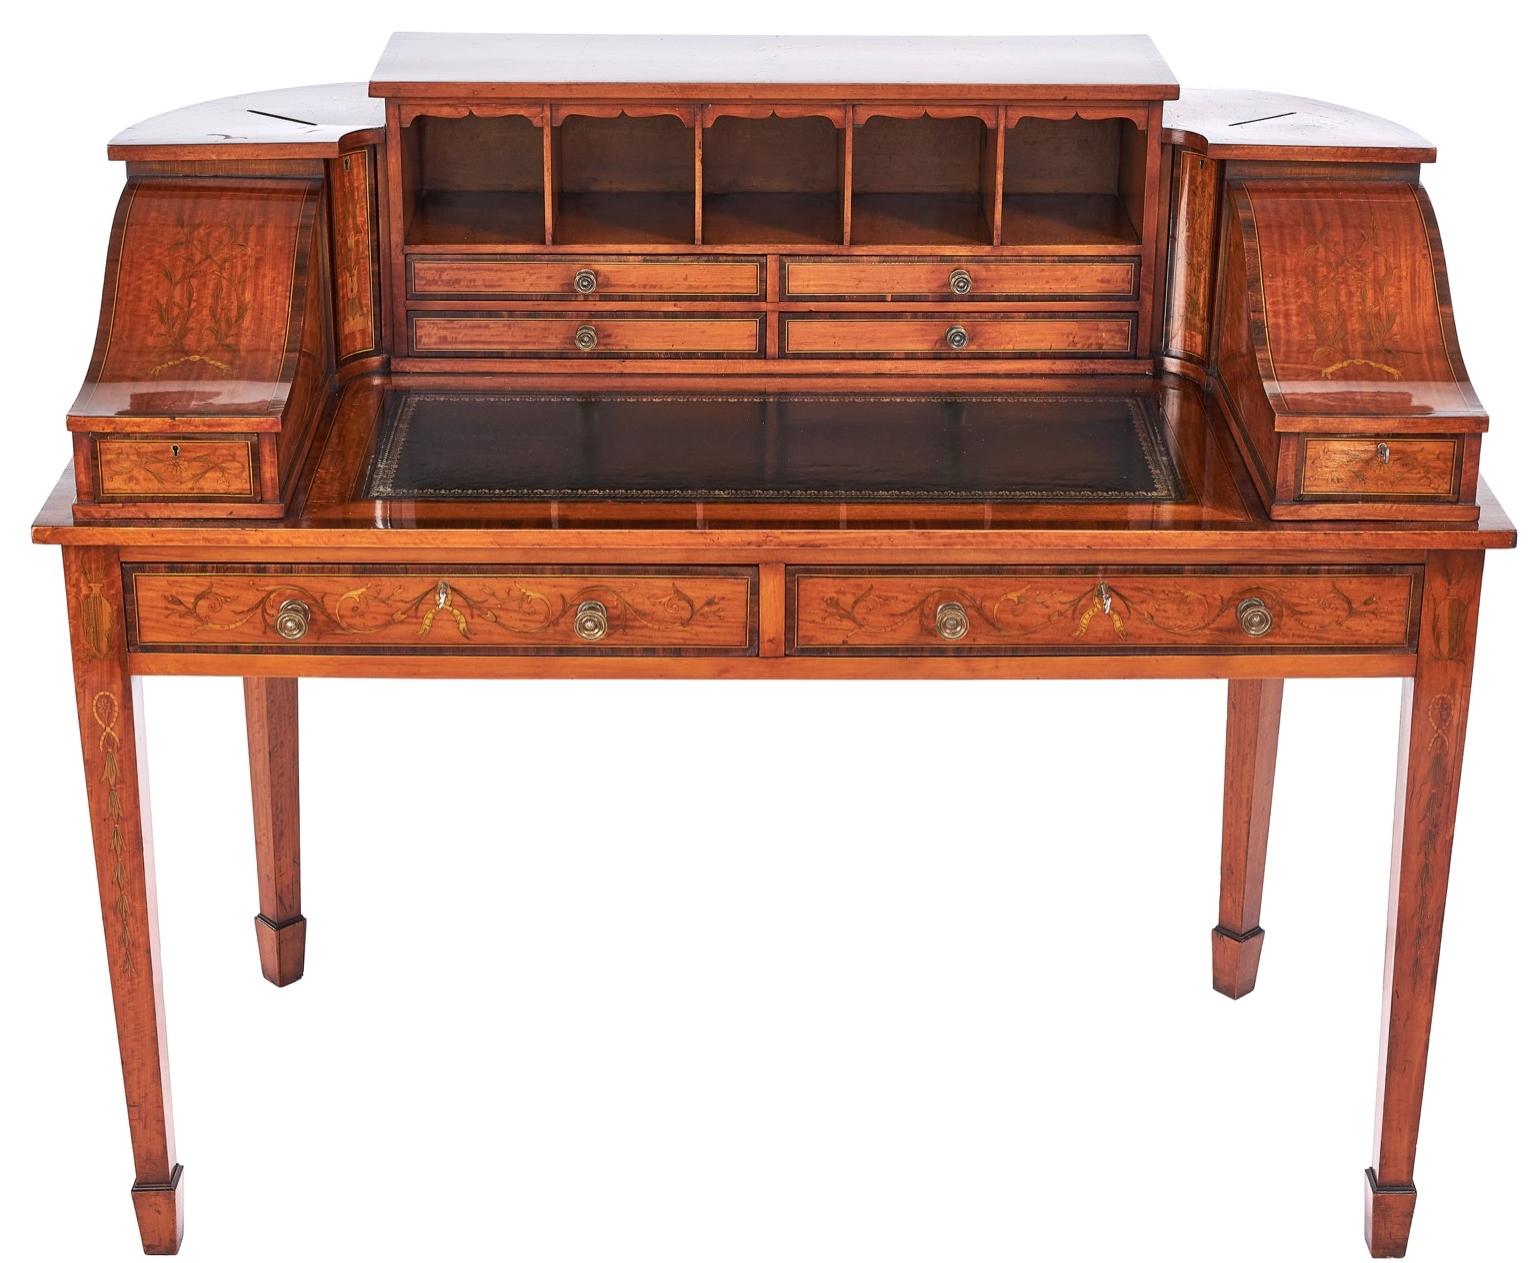 English Fine Sheraton Revival Satinwood Inlaid Carlton House Desk. with Letter Boxes, Ci For Sale